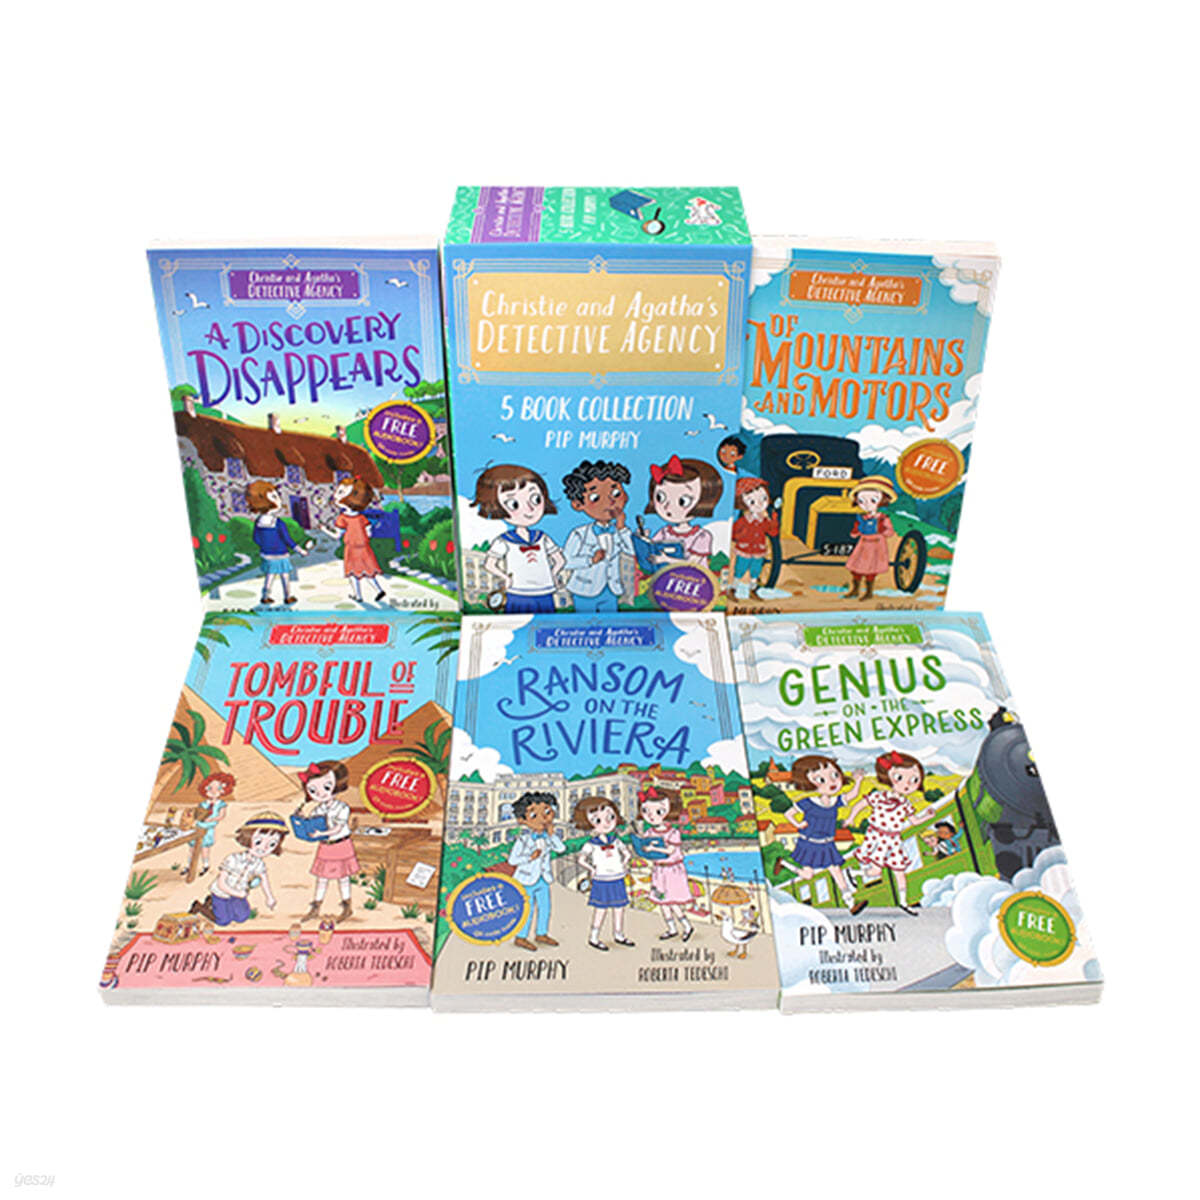 Christie and Agatha's Detective Agency 5 Books Collection Set (QR음원 포함) - 챕터북